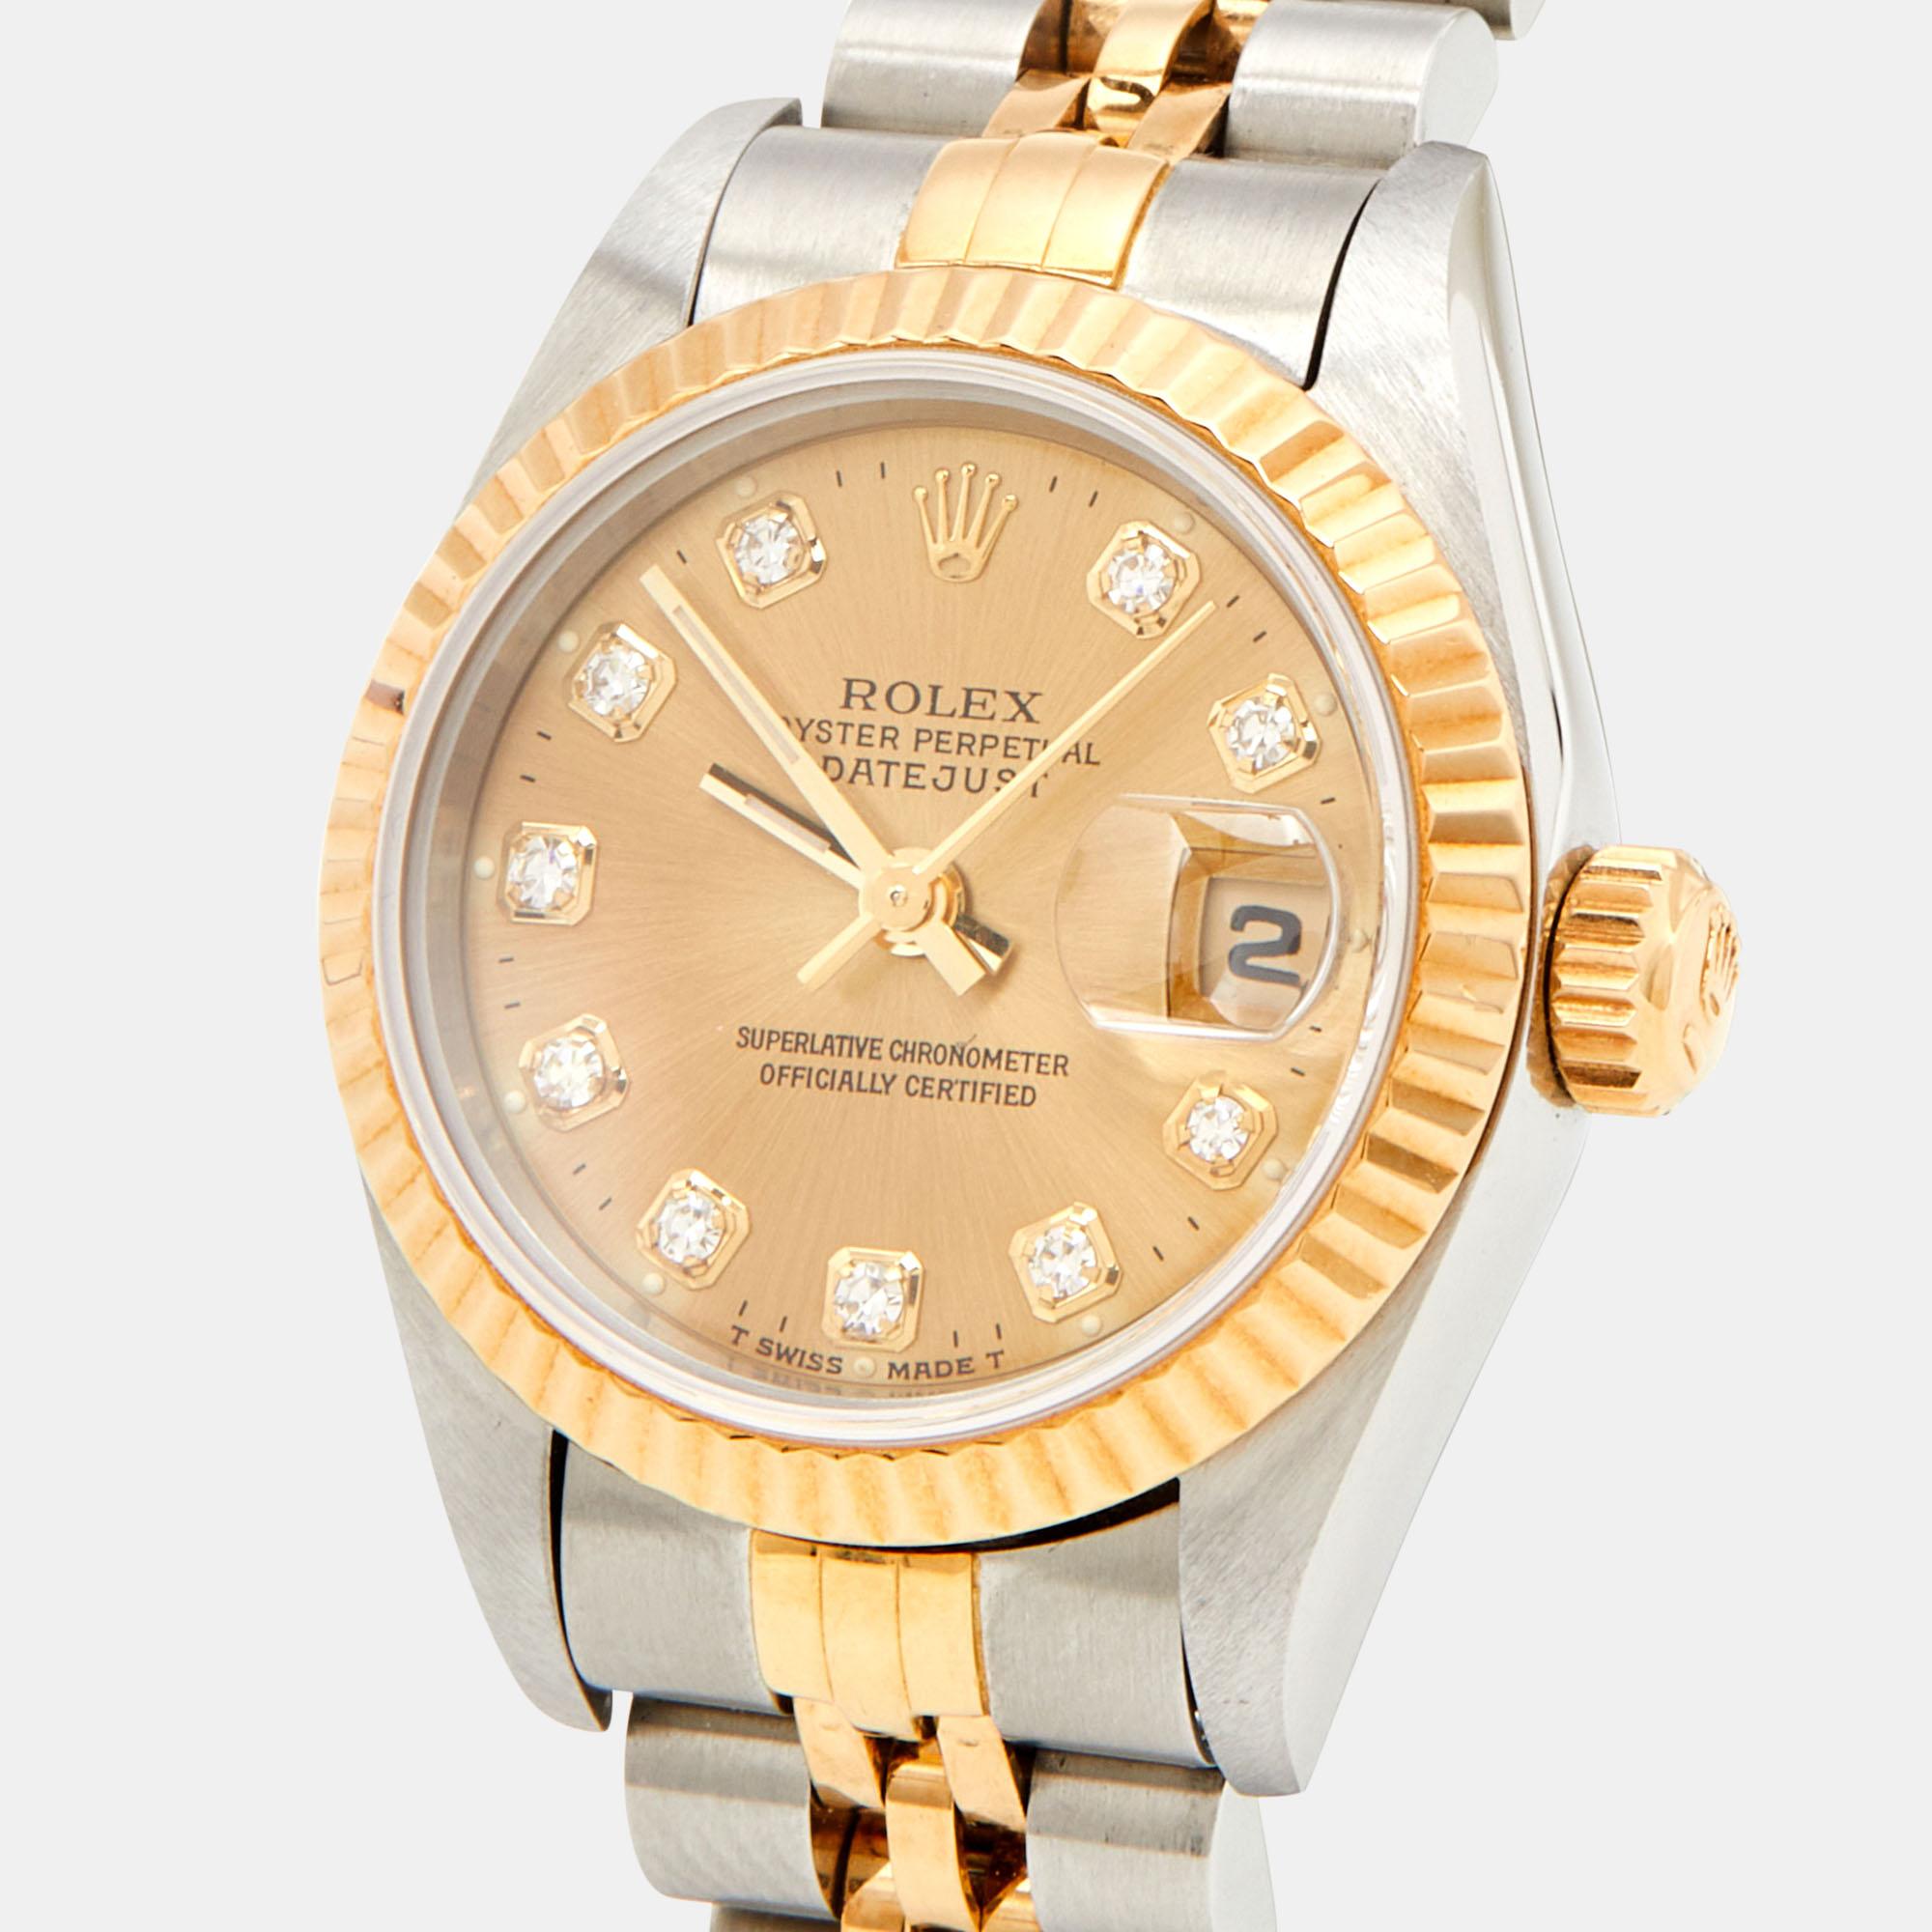 The Datejust is one of the most recognized and coveted watches from the house of Rolex. It has a distinct look and an irrefutable appeal. Crafted in stainless steel and 18k yellow gold, this Rolex Datejust 69173 wristwatch for women has the